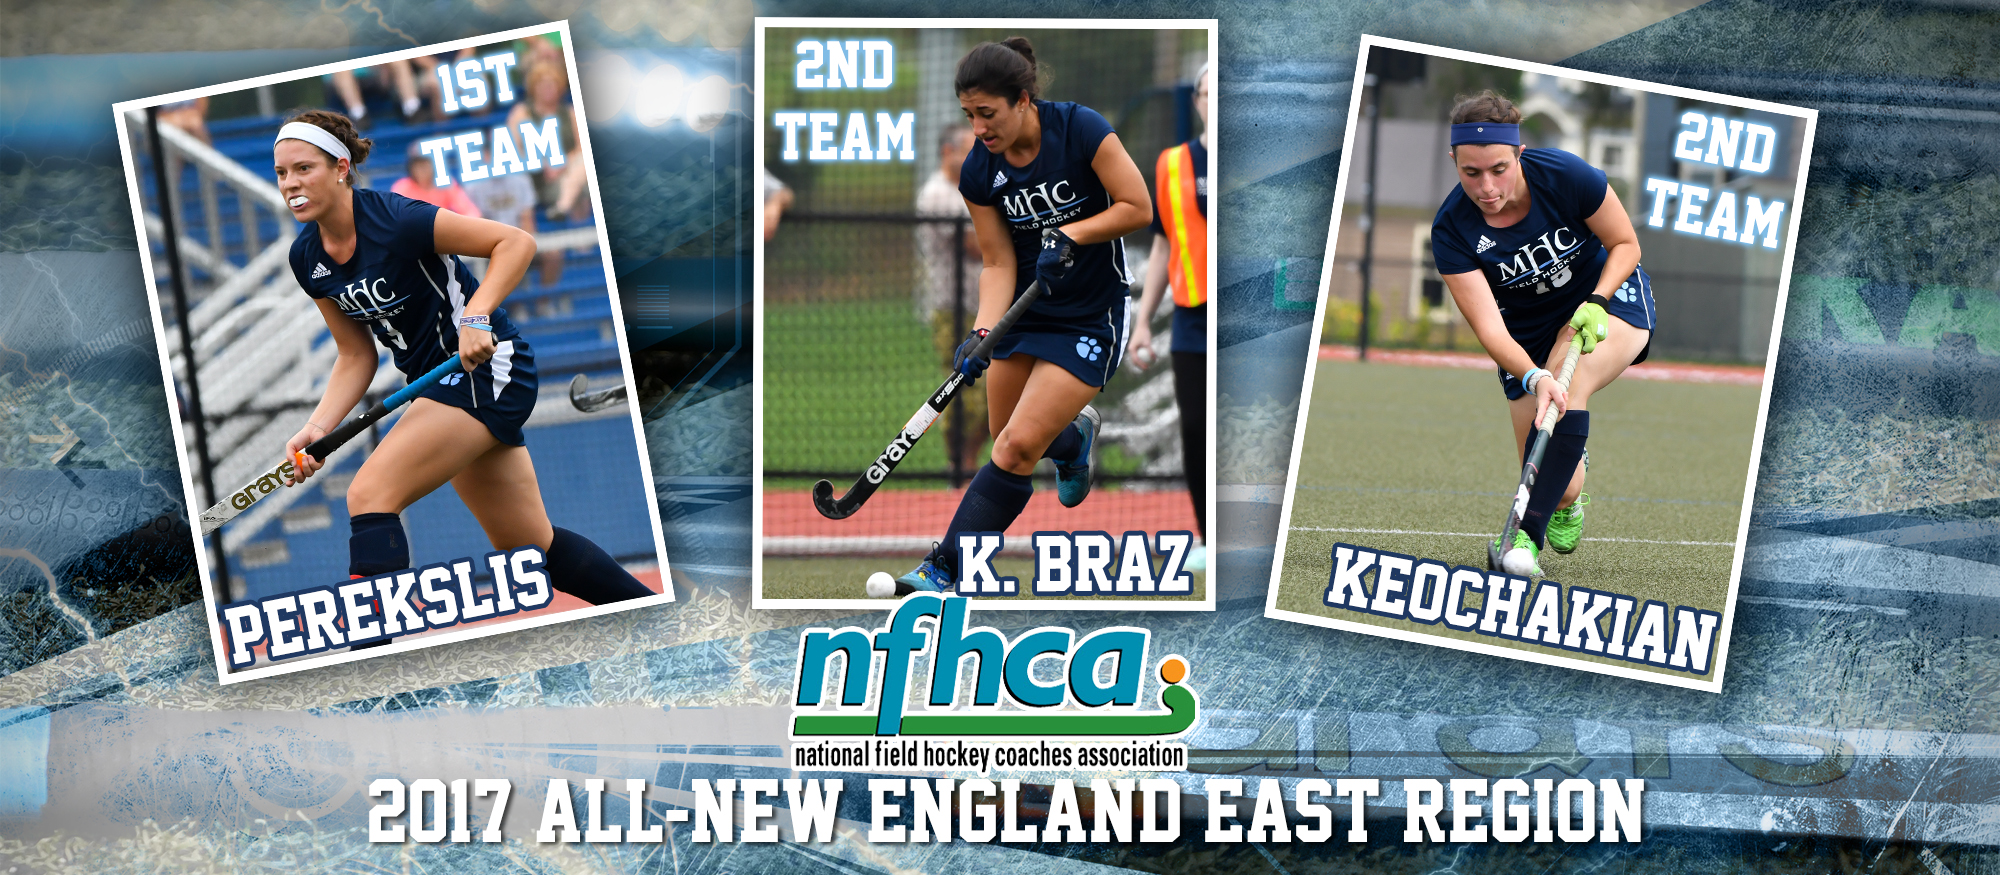 Image depicting action photos of Lyons field hockey players Sophie Perekslis, Kaitlin Braz and Mirjam Keochakian. All three were named to the 2017 NFHCA All-New England East Region Team on Wednesday, November 29.